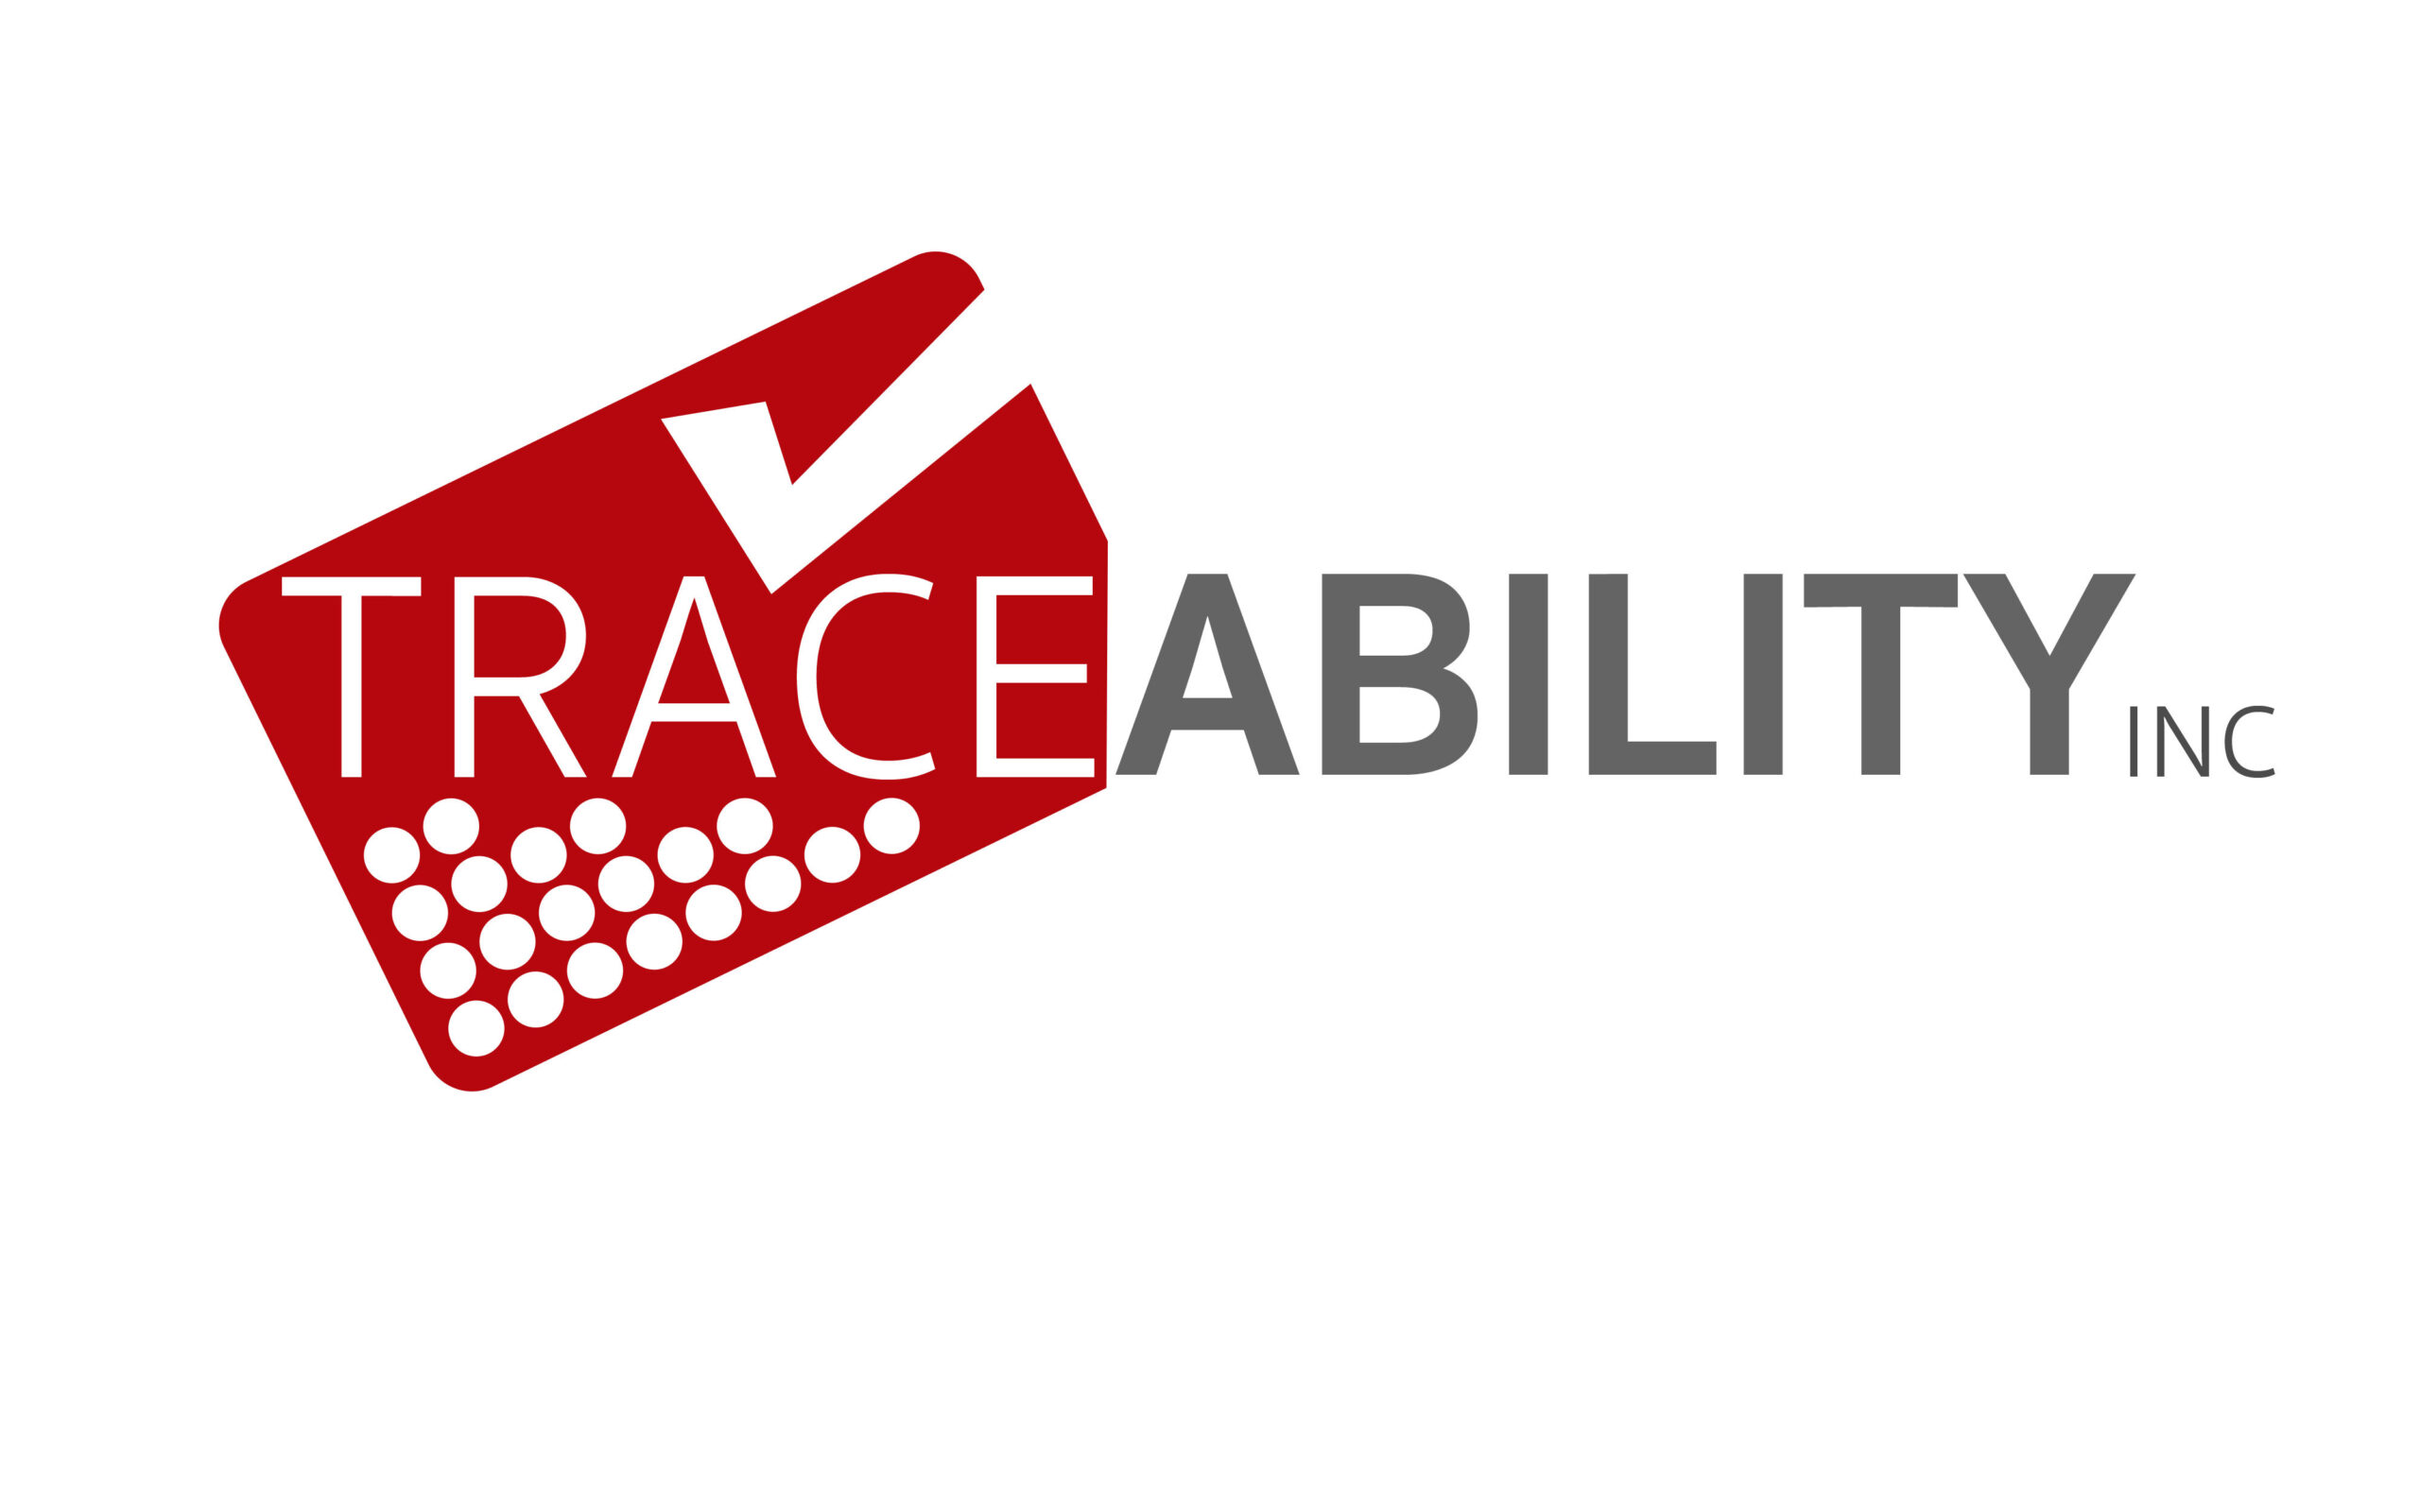 <a href="https://traceabilityinc.com/">Trace-Ability</a> has enabled complete automation of radio-pharmaceutical QC testing on a very simple platform based on proven hardware and software.   